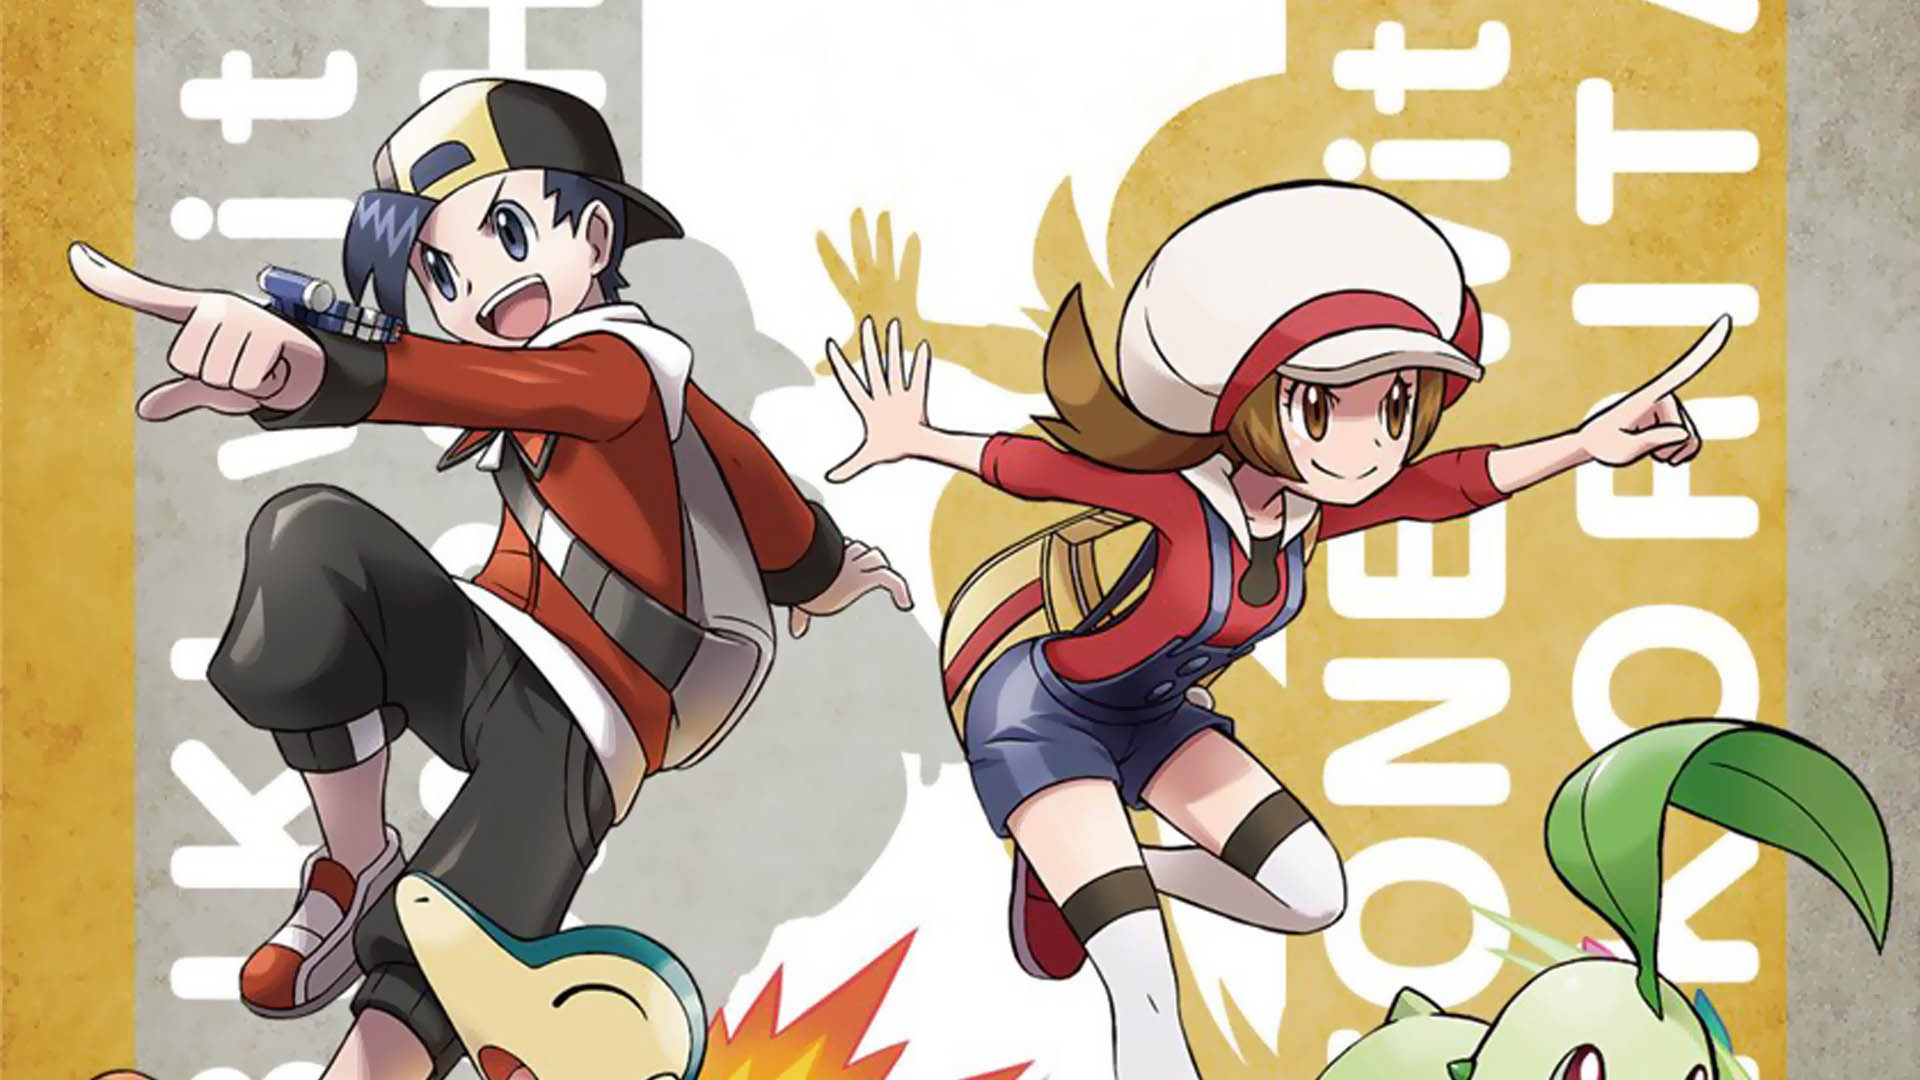 New Pokémon HeartGold & SoulSilver figures revealed for Ethan and Lyra